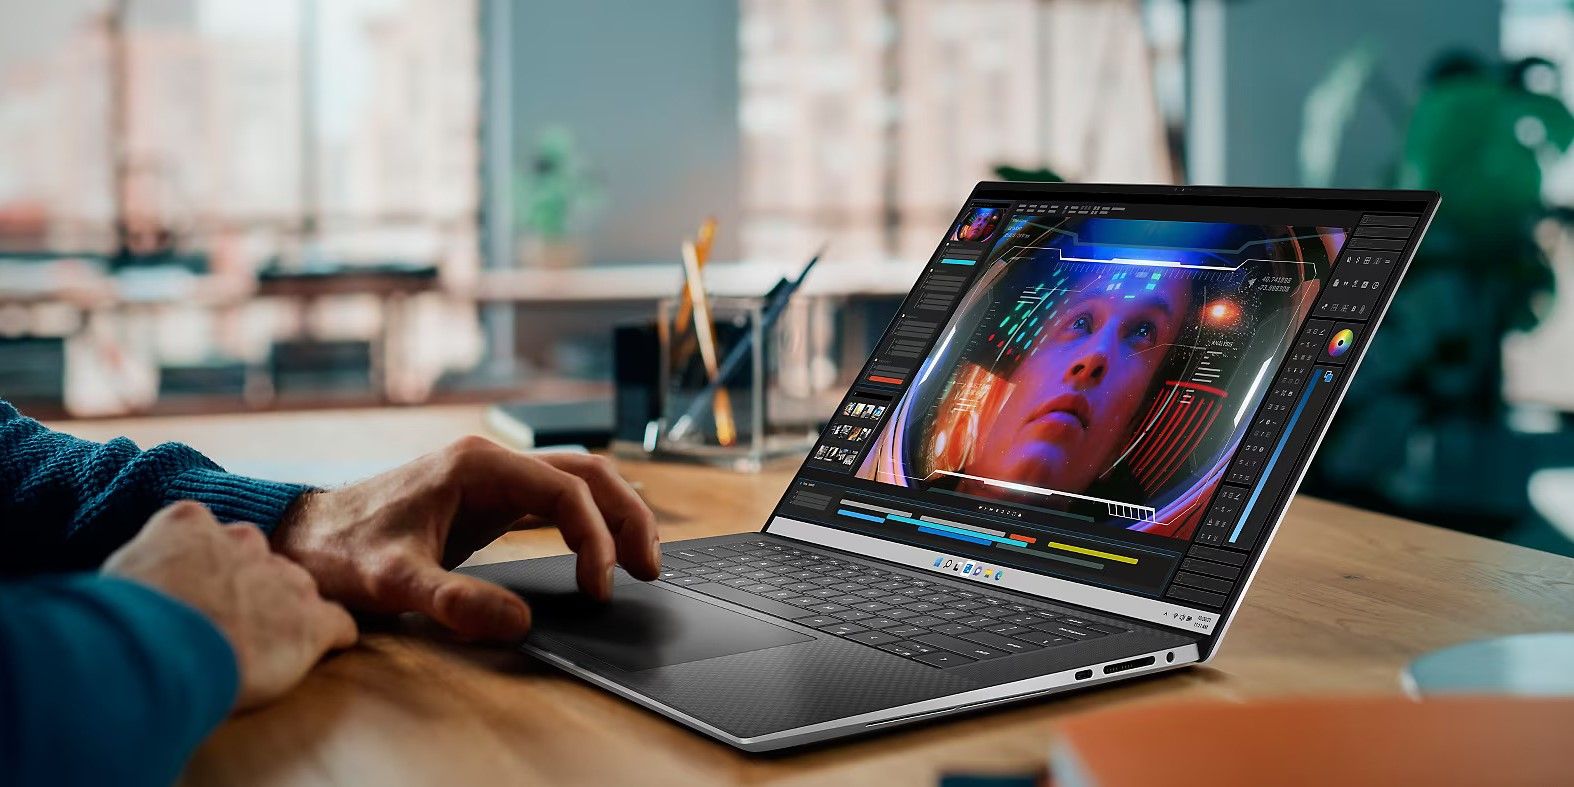 Image of the Dell XPS 15